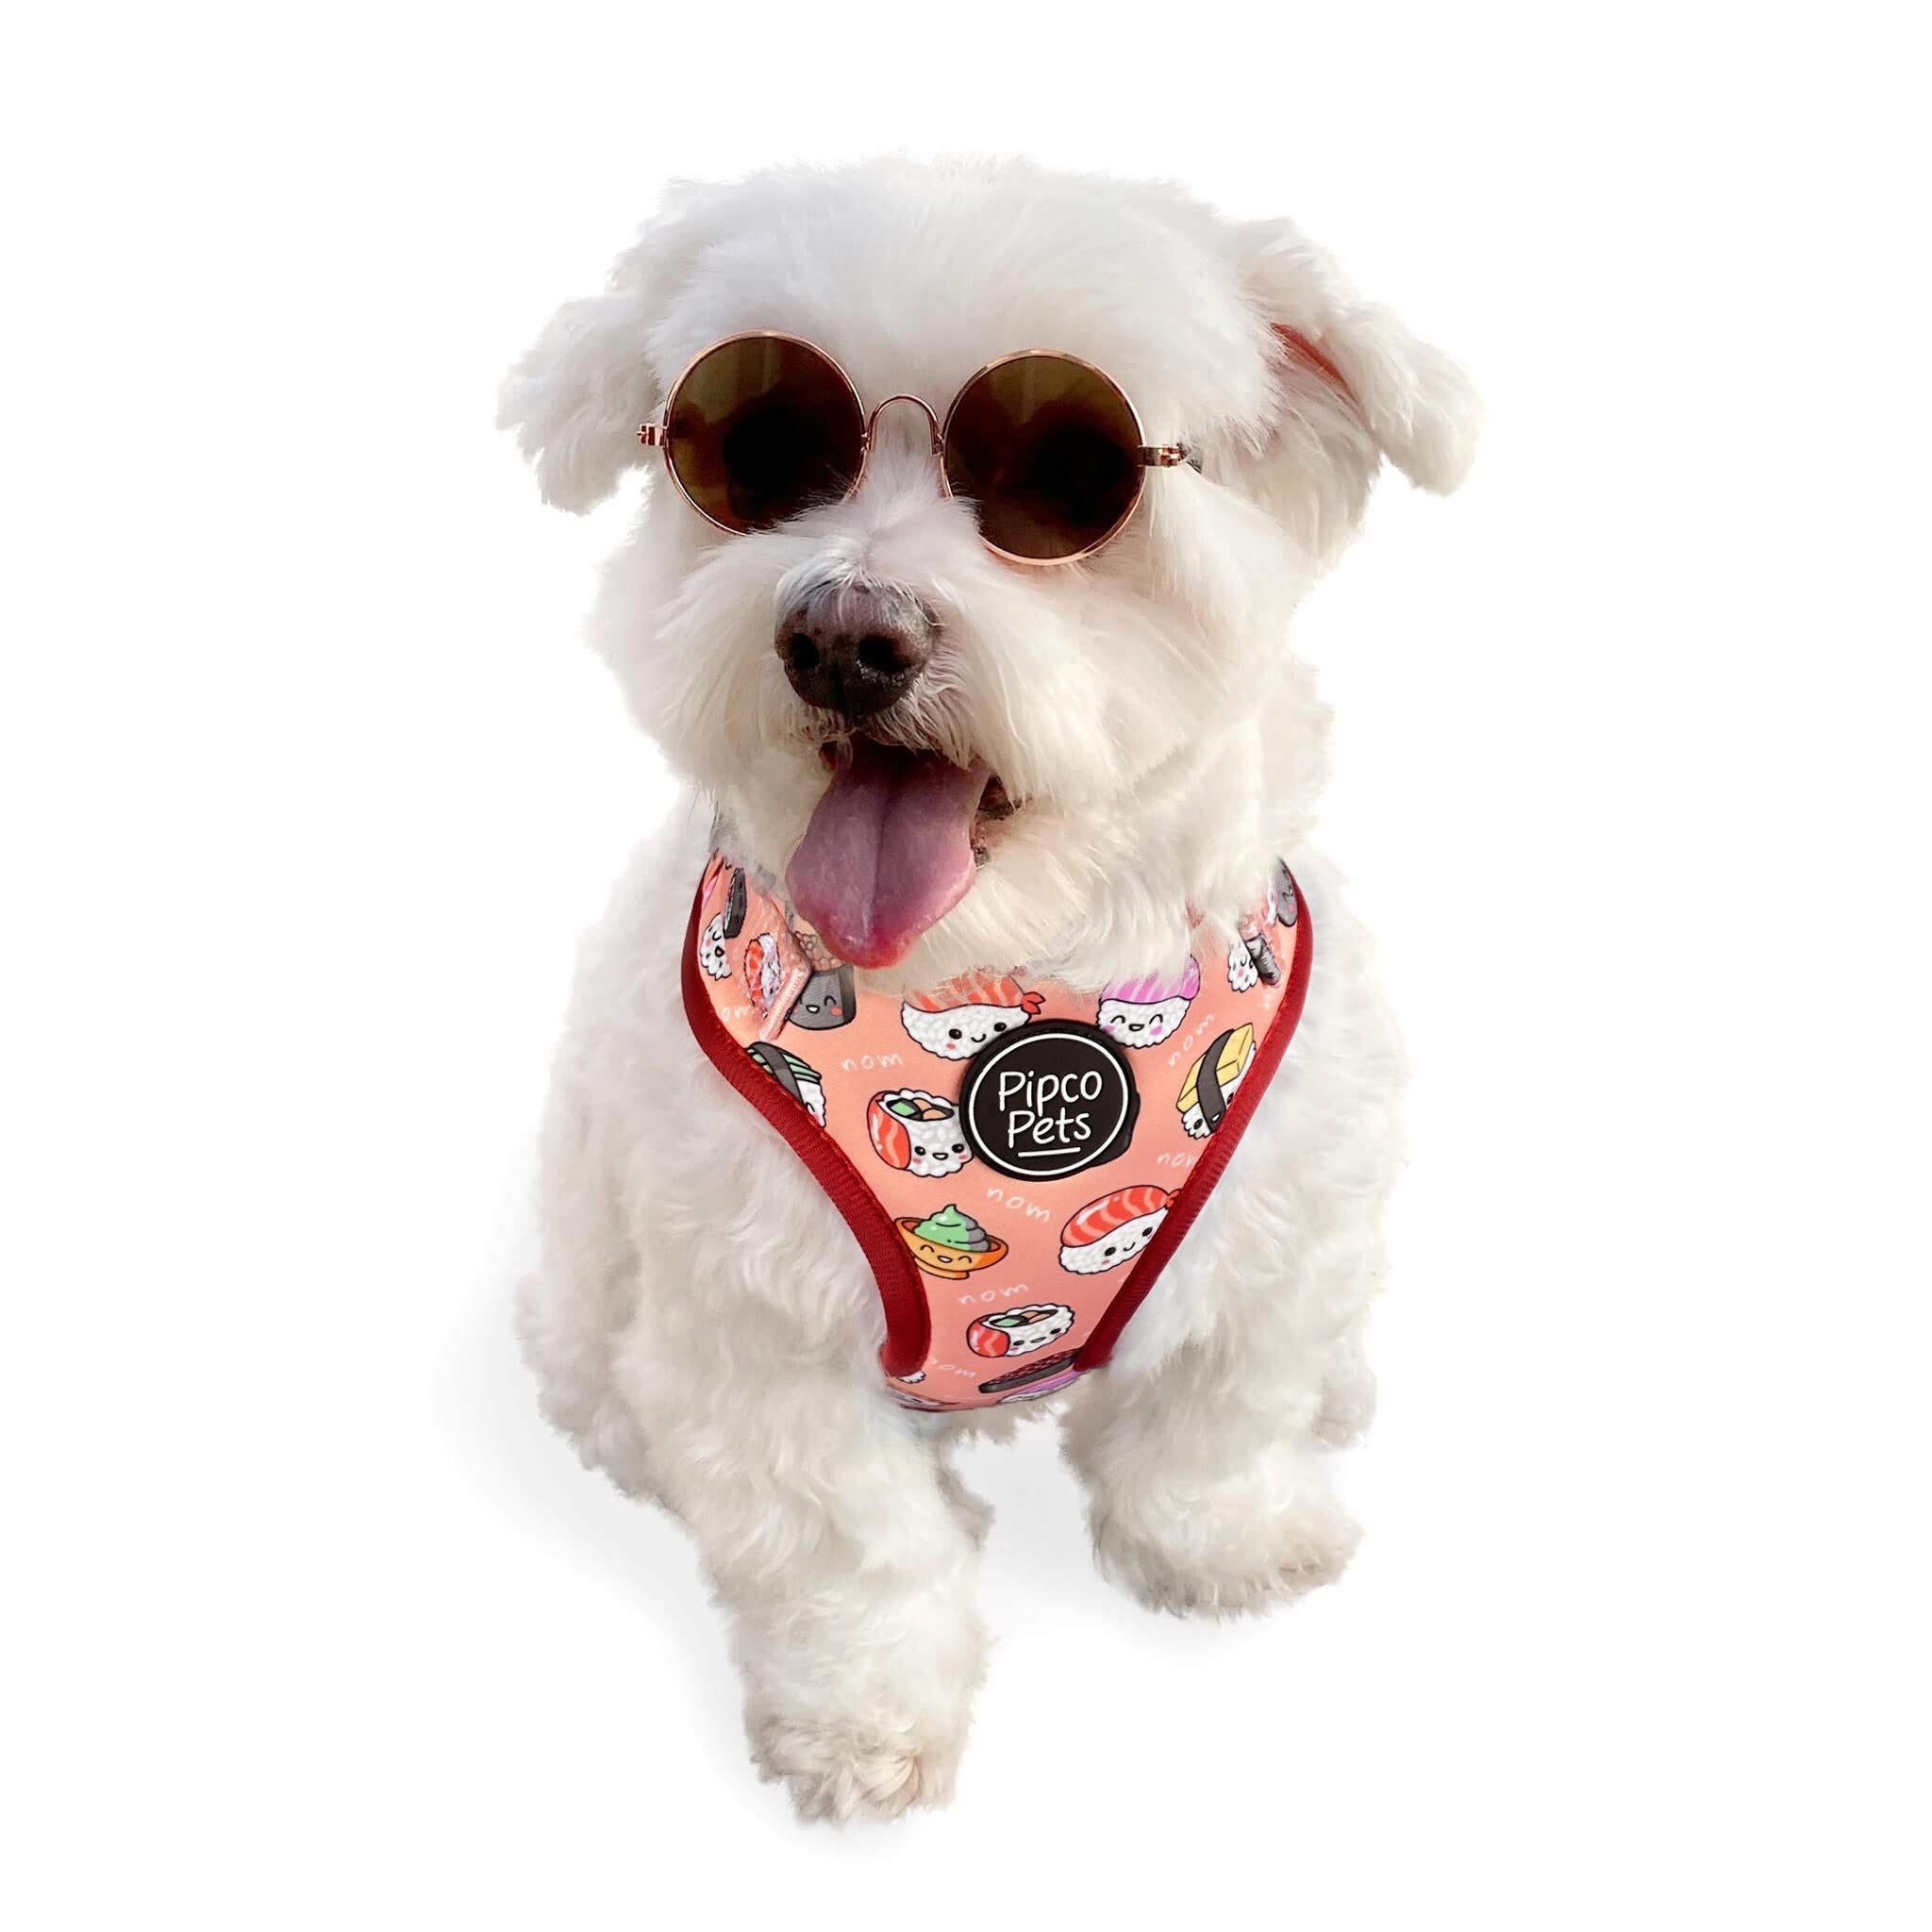 Cute dog wearing sunglasses and Pipco Pets adjustable harness with Sushi Train print pattern in pink